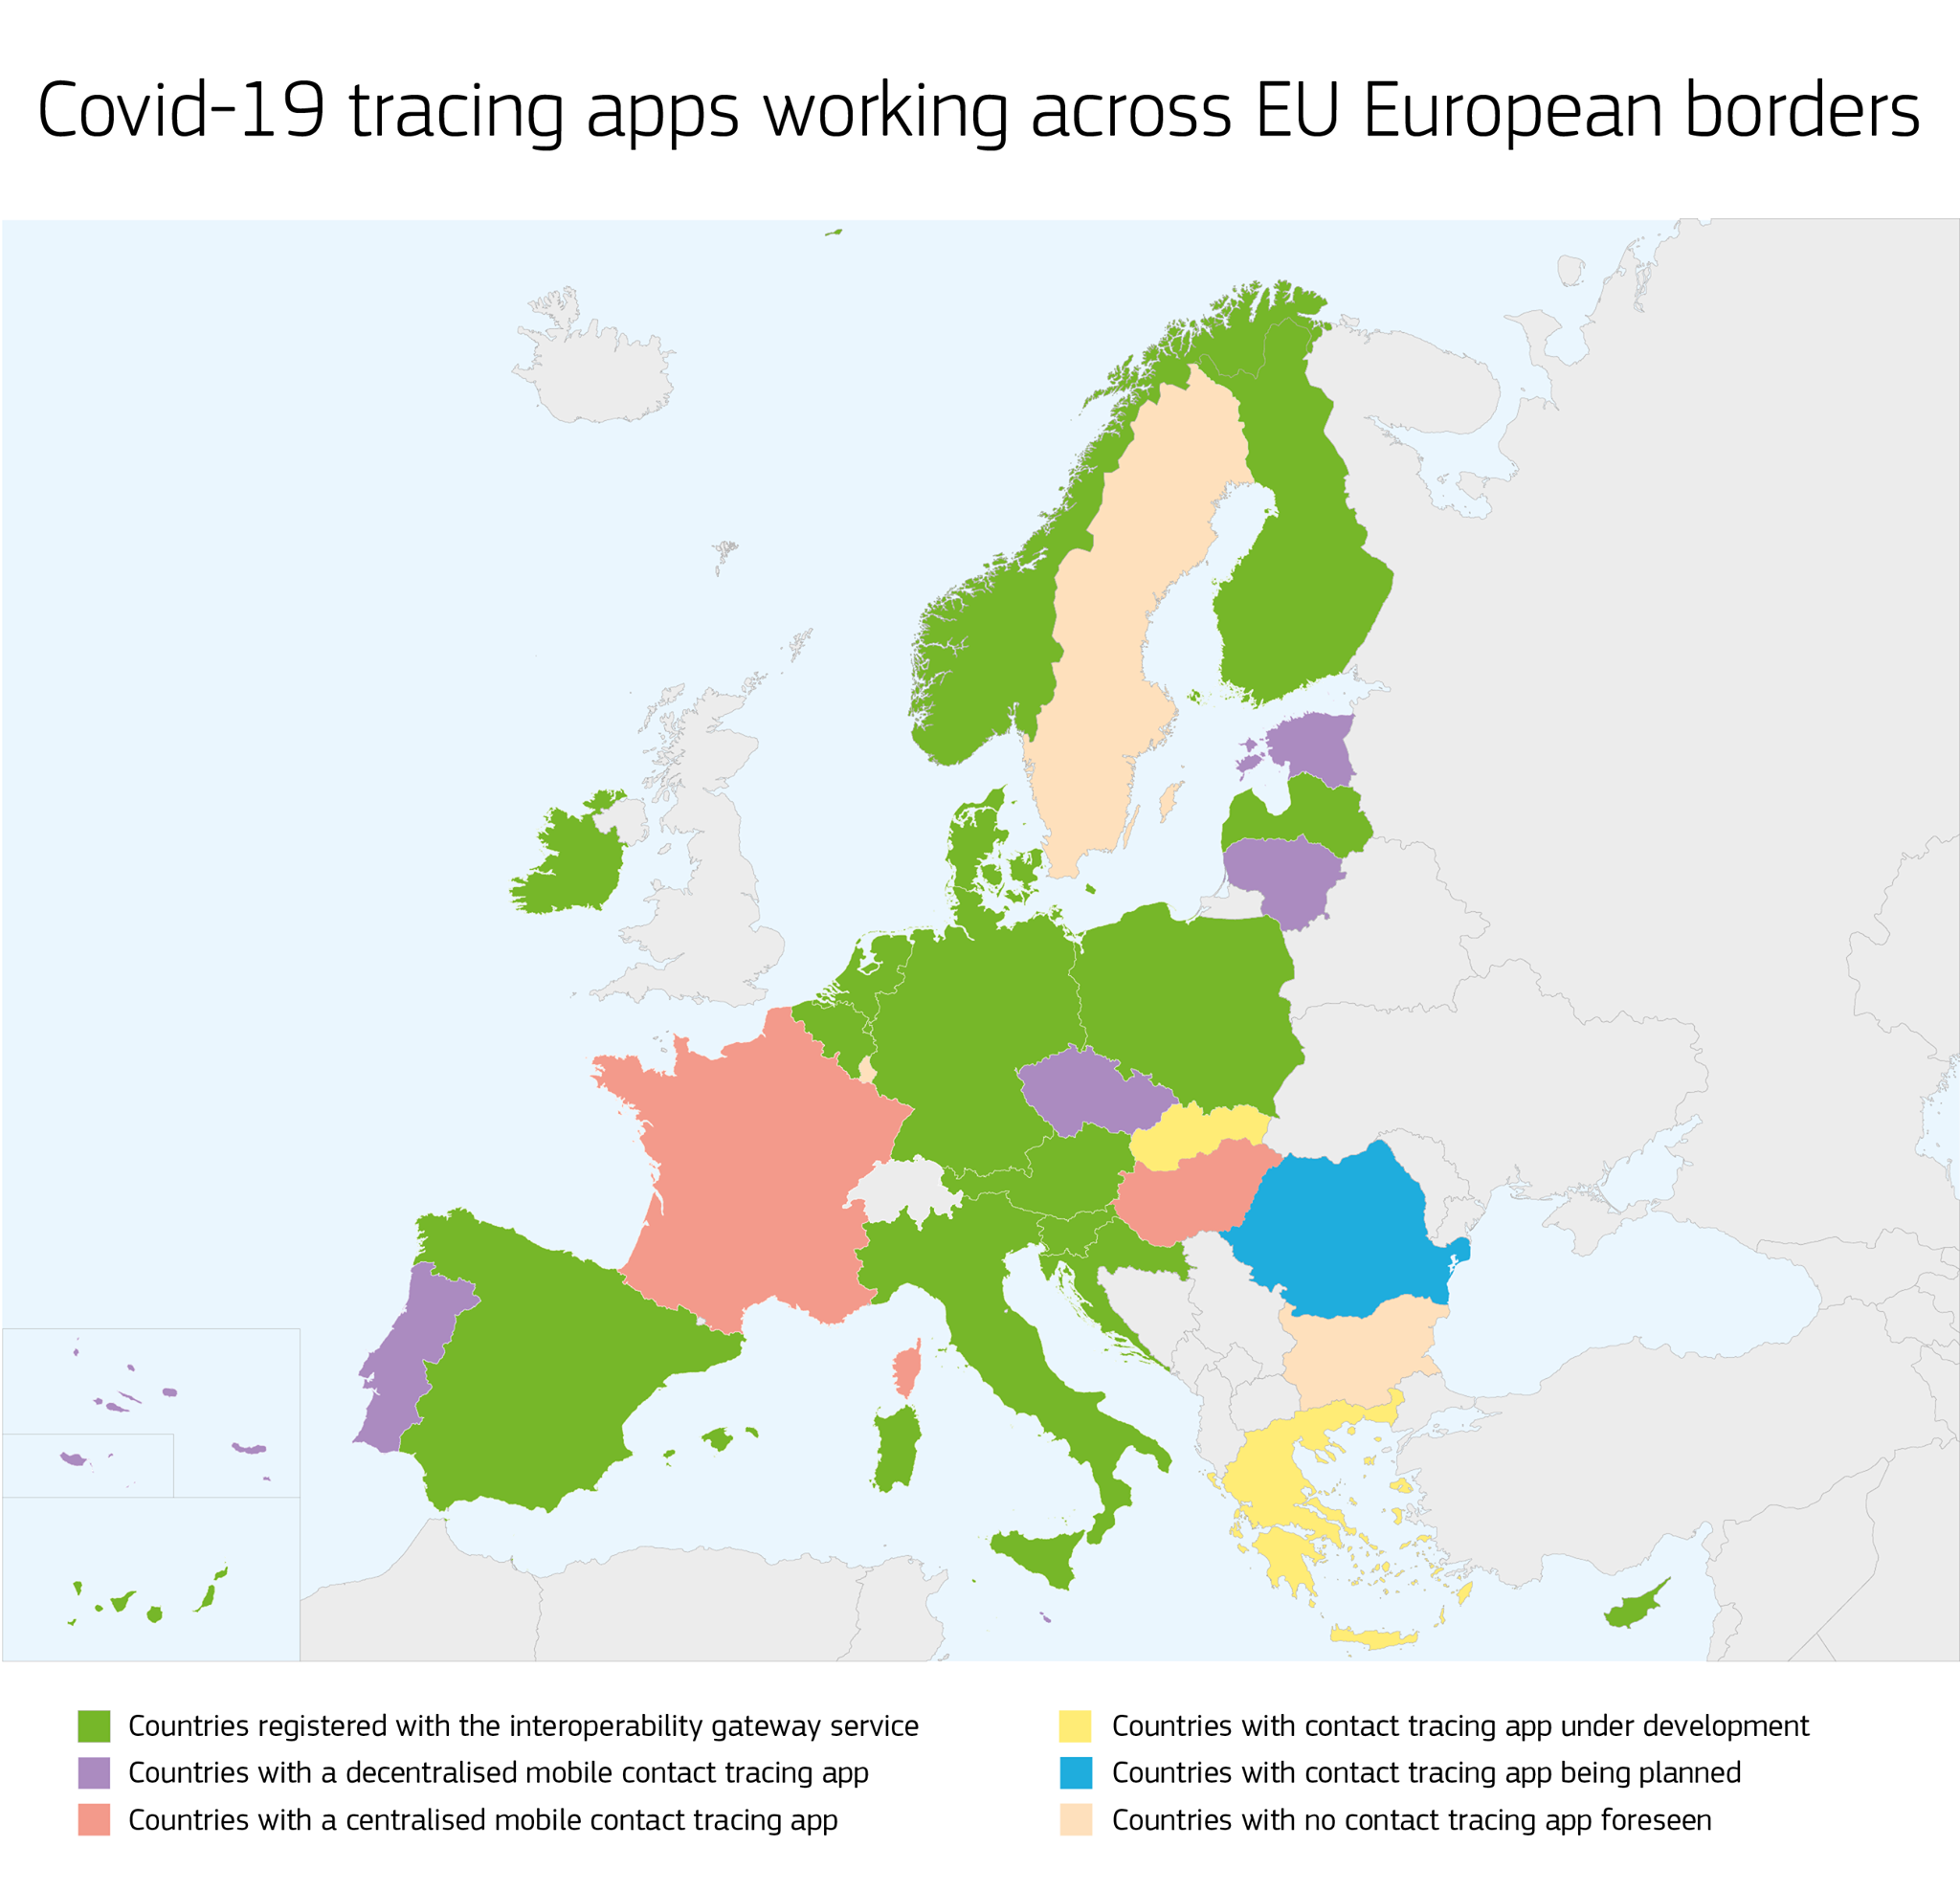 15 countries made their national coronavirus tracing and warning apps work across borders. These apps can now talk to each other and warn users if they were in contact with someone who has indicated that they have tested positive for COVID-19 (16-Mar-2021)